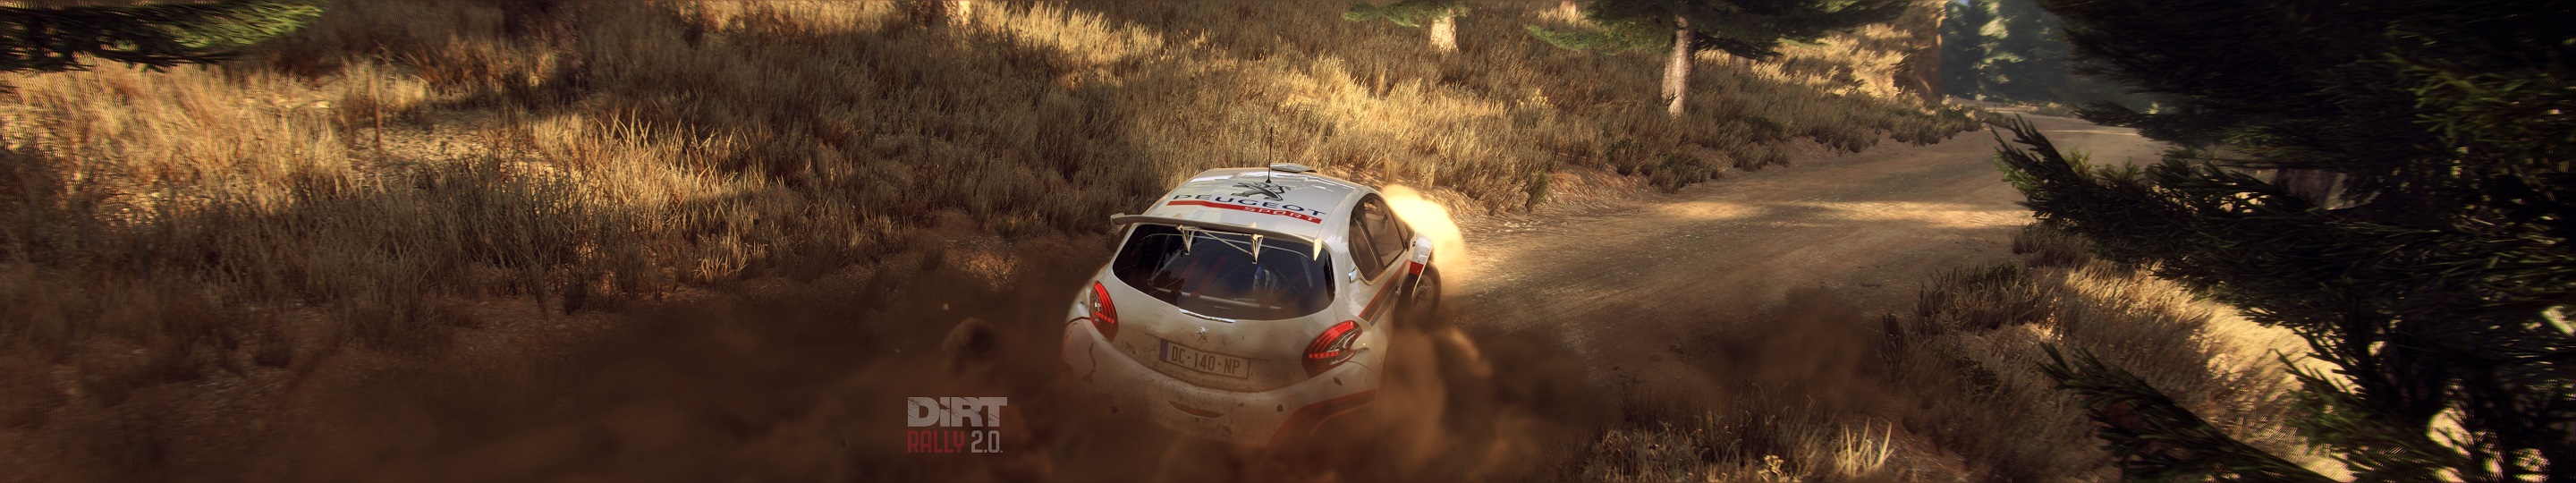 3 DIRT RALLY 2 GREECE with R5 PEUGEOT copy.jpg